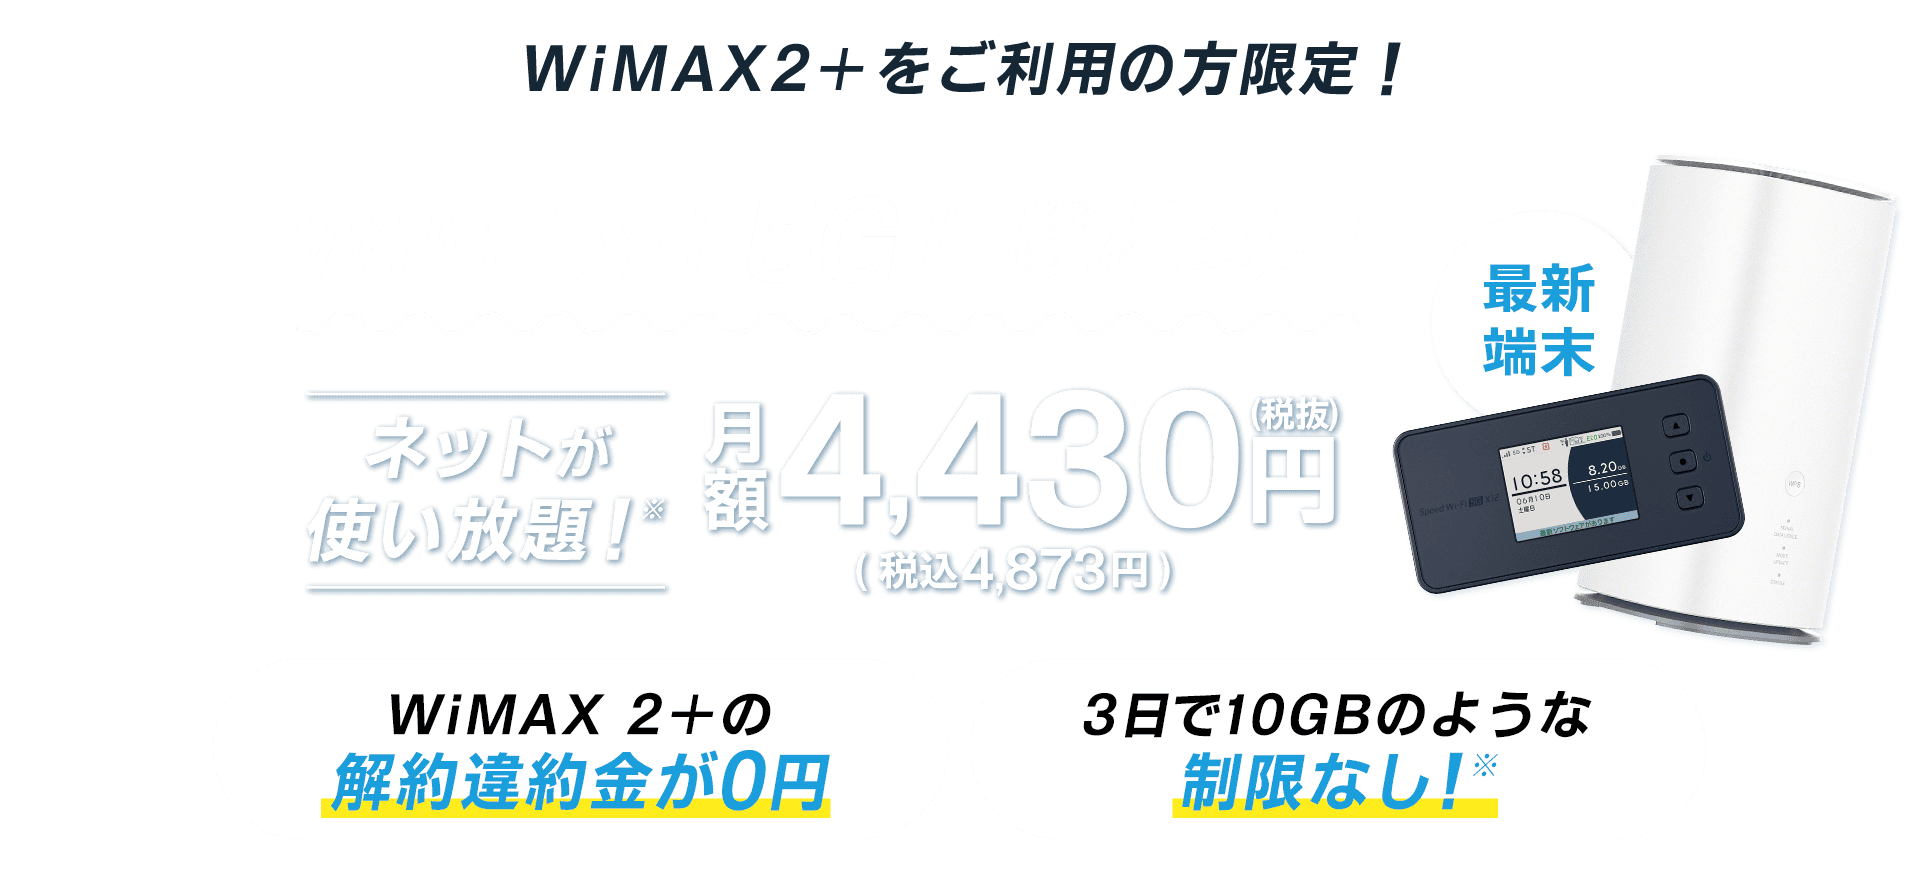 WiMAX 2+をご利用の方限定！WiMAX+5Gに機種変更